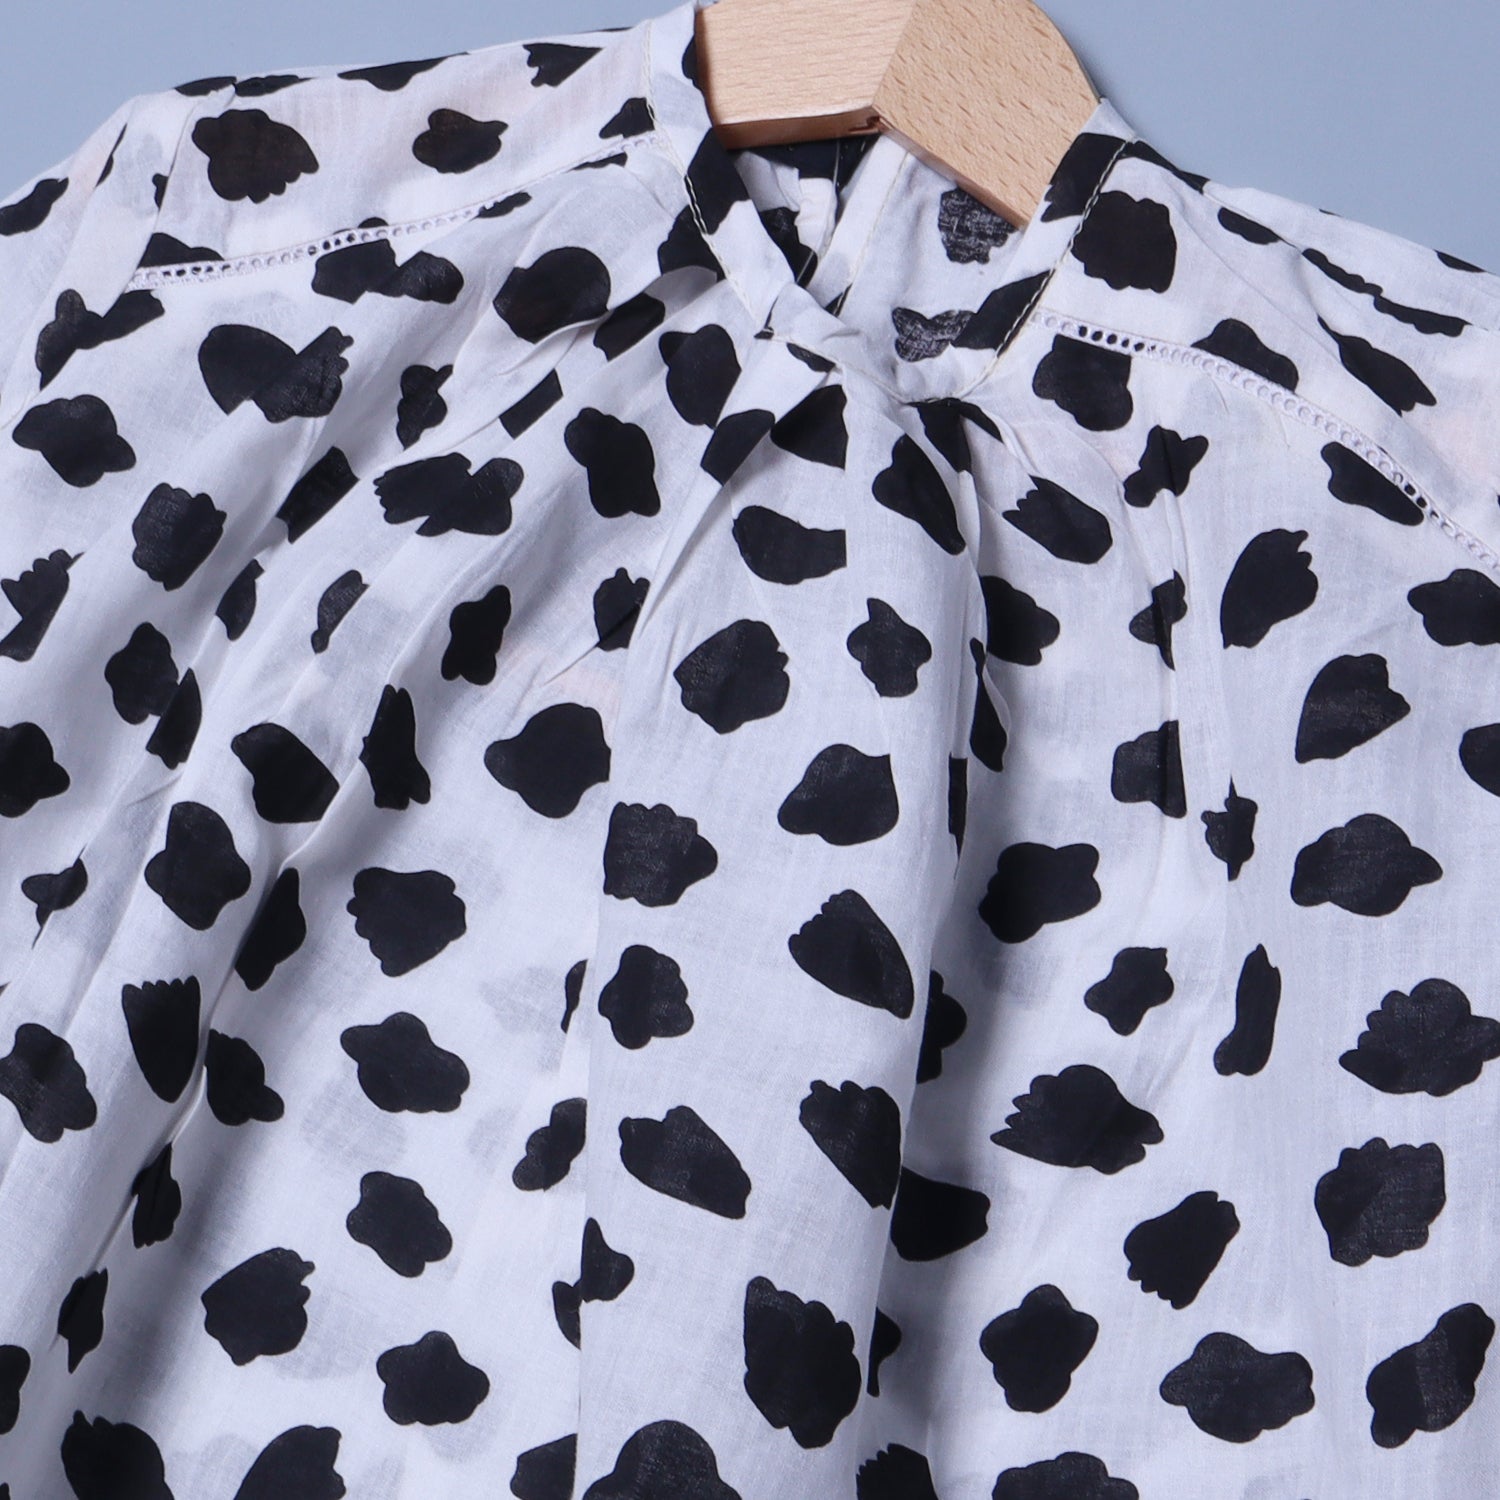 WHITE WITH BLACK SPOTS PRINTED TOP FROCK FOR GIRLS